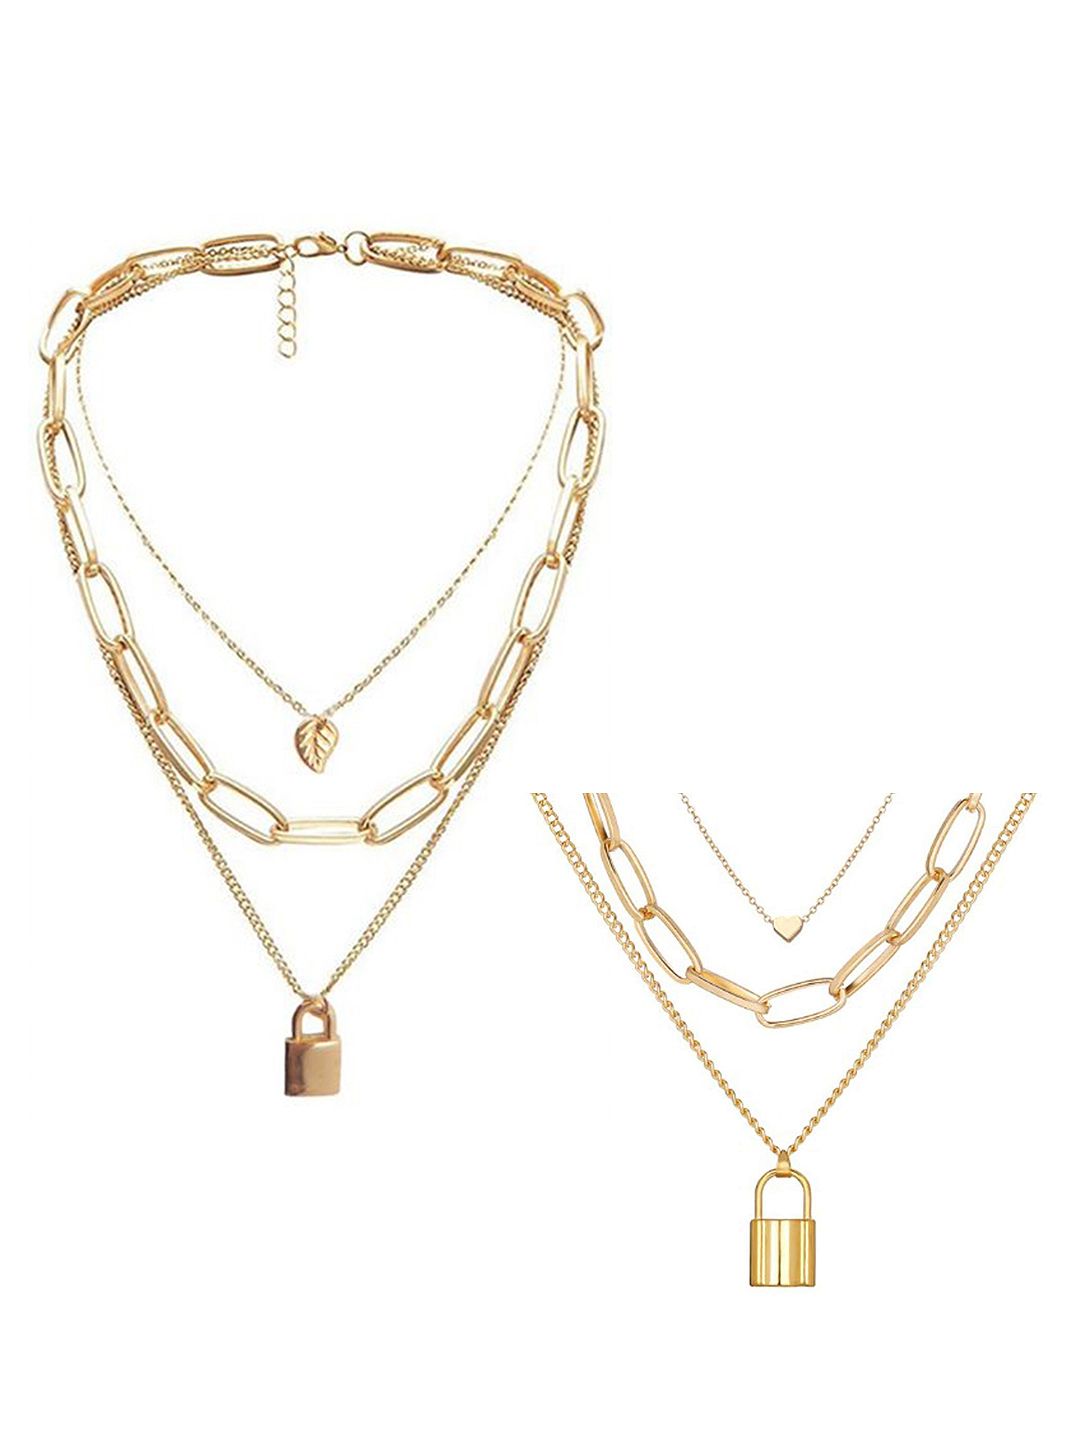 Vembley Set Of 2 Gold-Plated Layered Necklaces Price in India